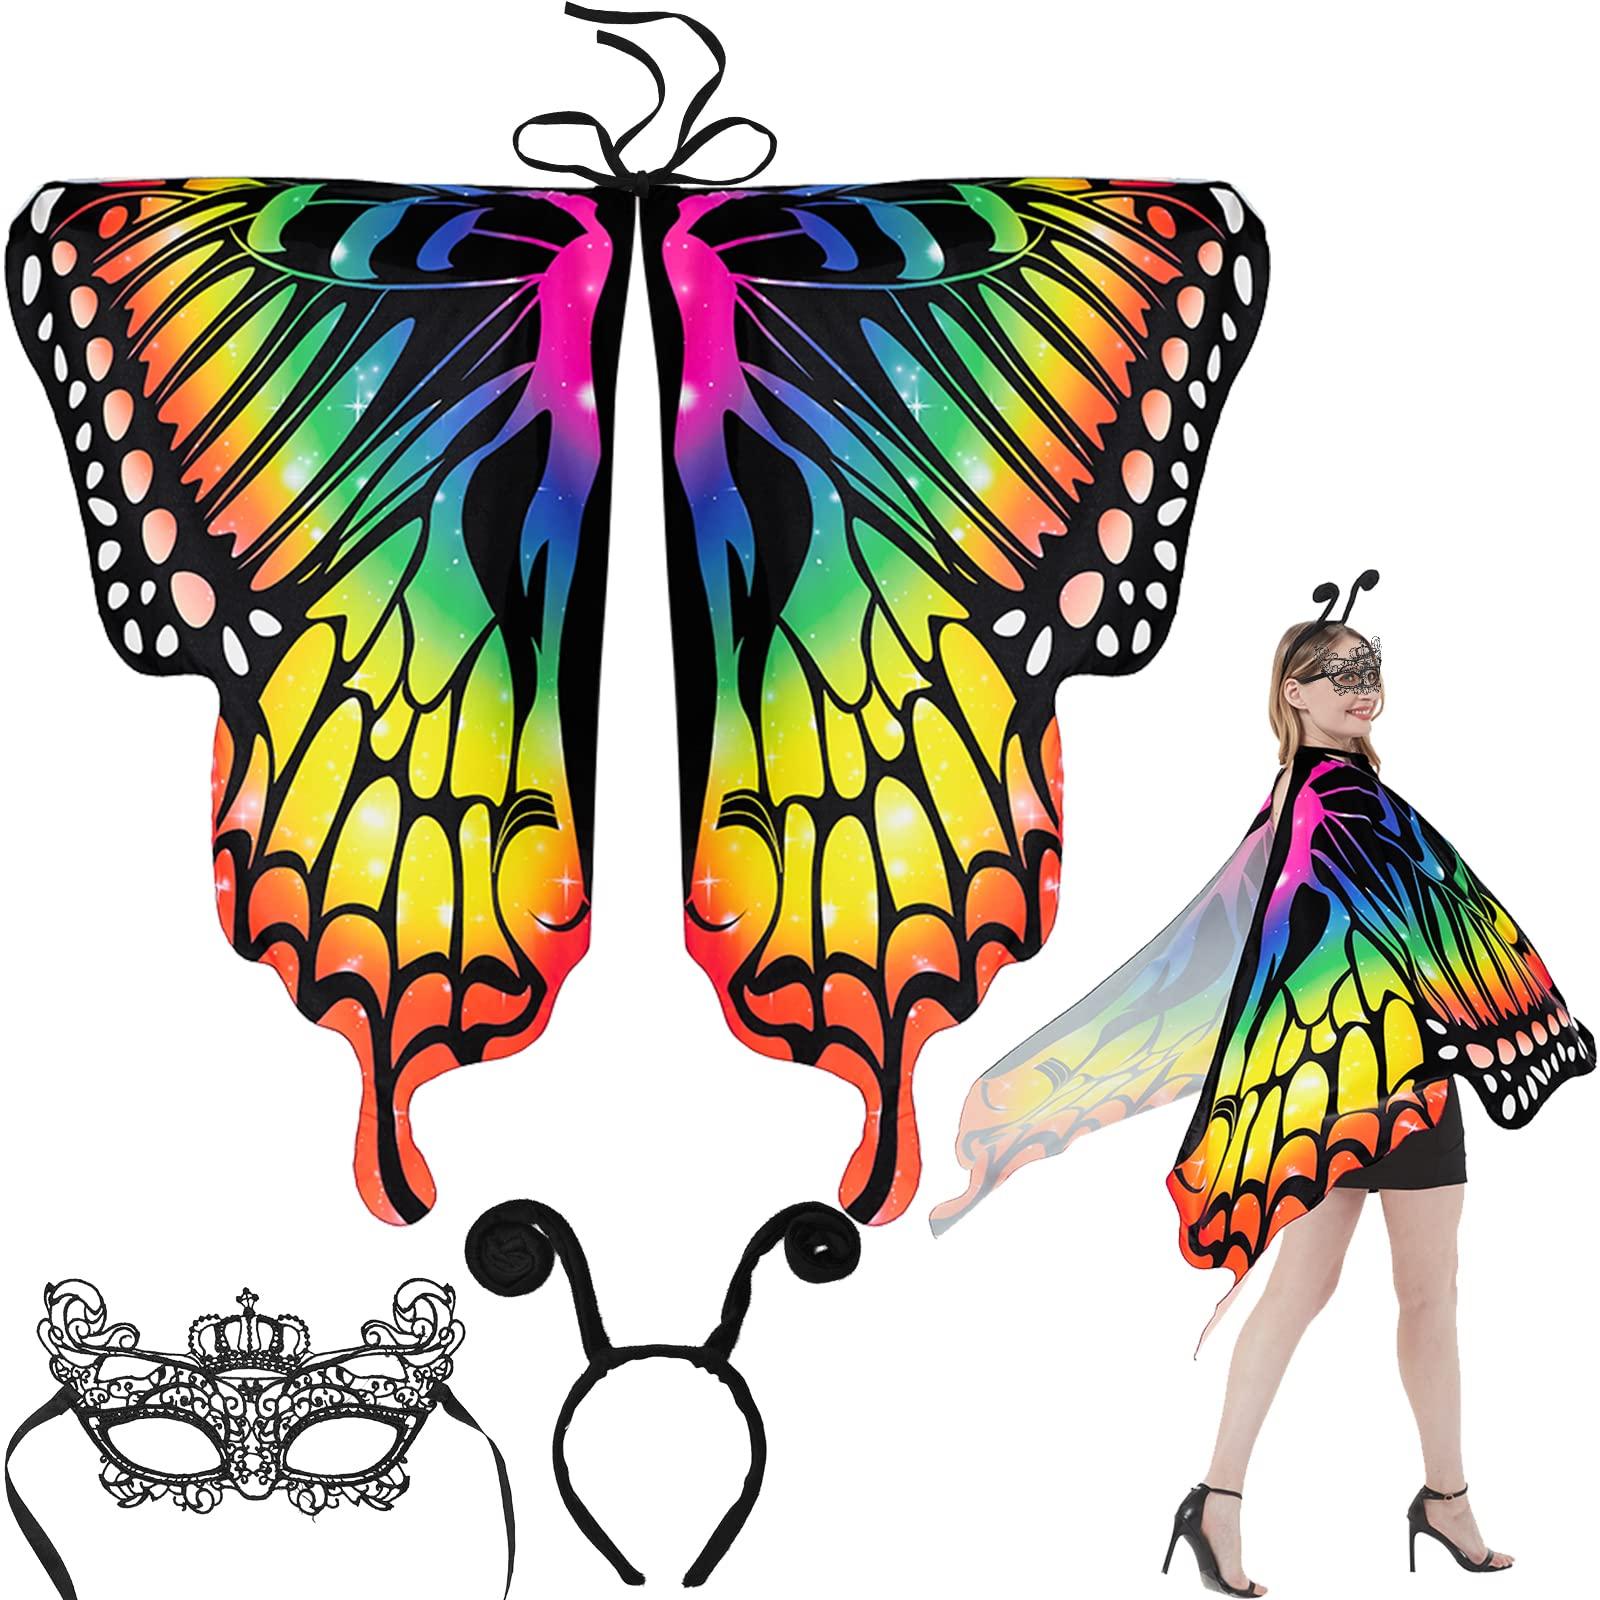 Pipihome Butterfly Wings Shawl for Womens Girls, Butterfly Costumes Fairy Wing Cape, Dance Party Photo Fairy Ladies Nymph Pixie Cosplay Dancing Accessory Cape Dresses Bikini Cover-Up (Colorful)